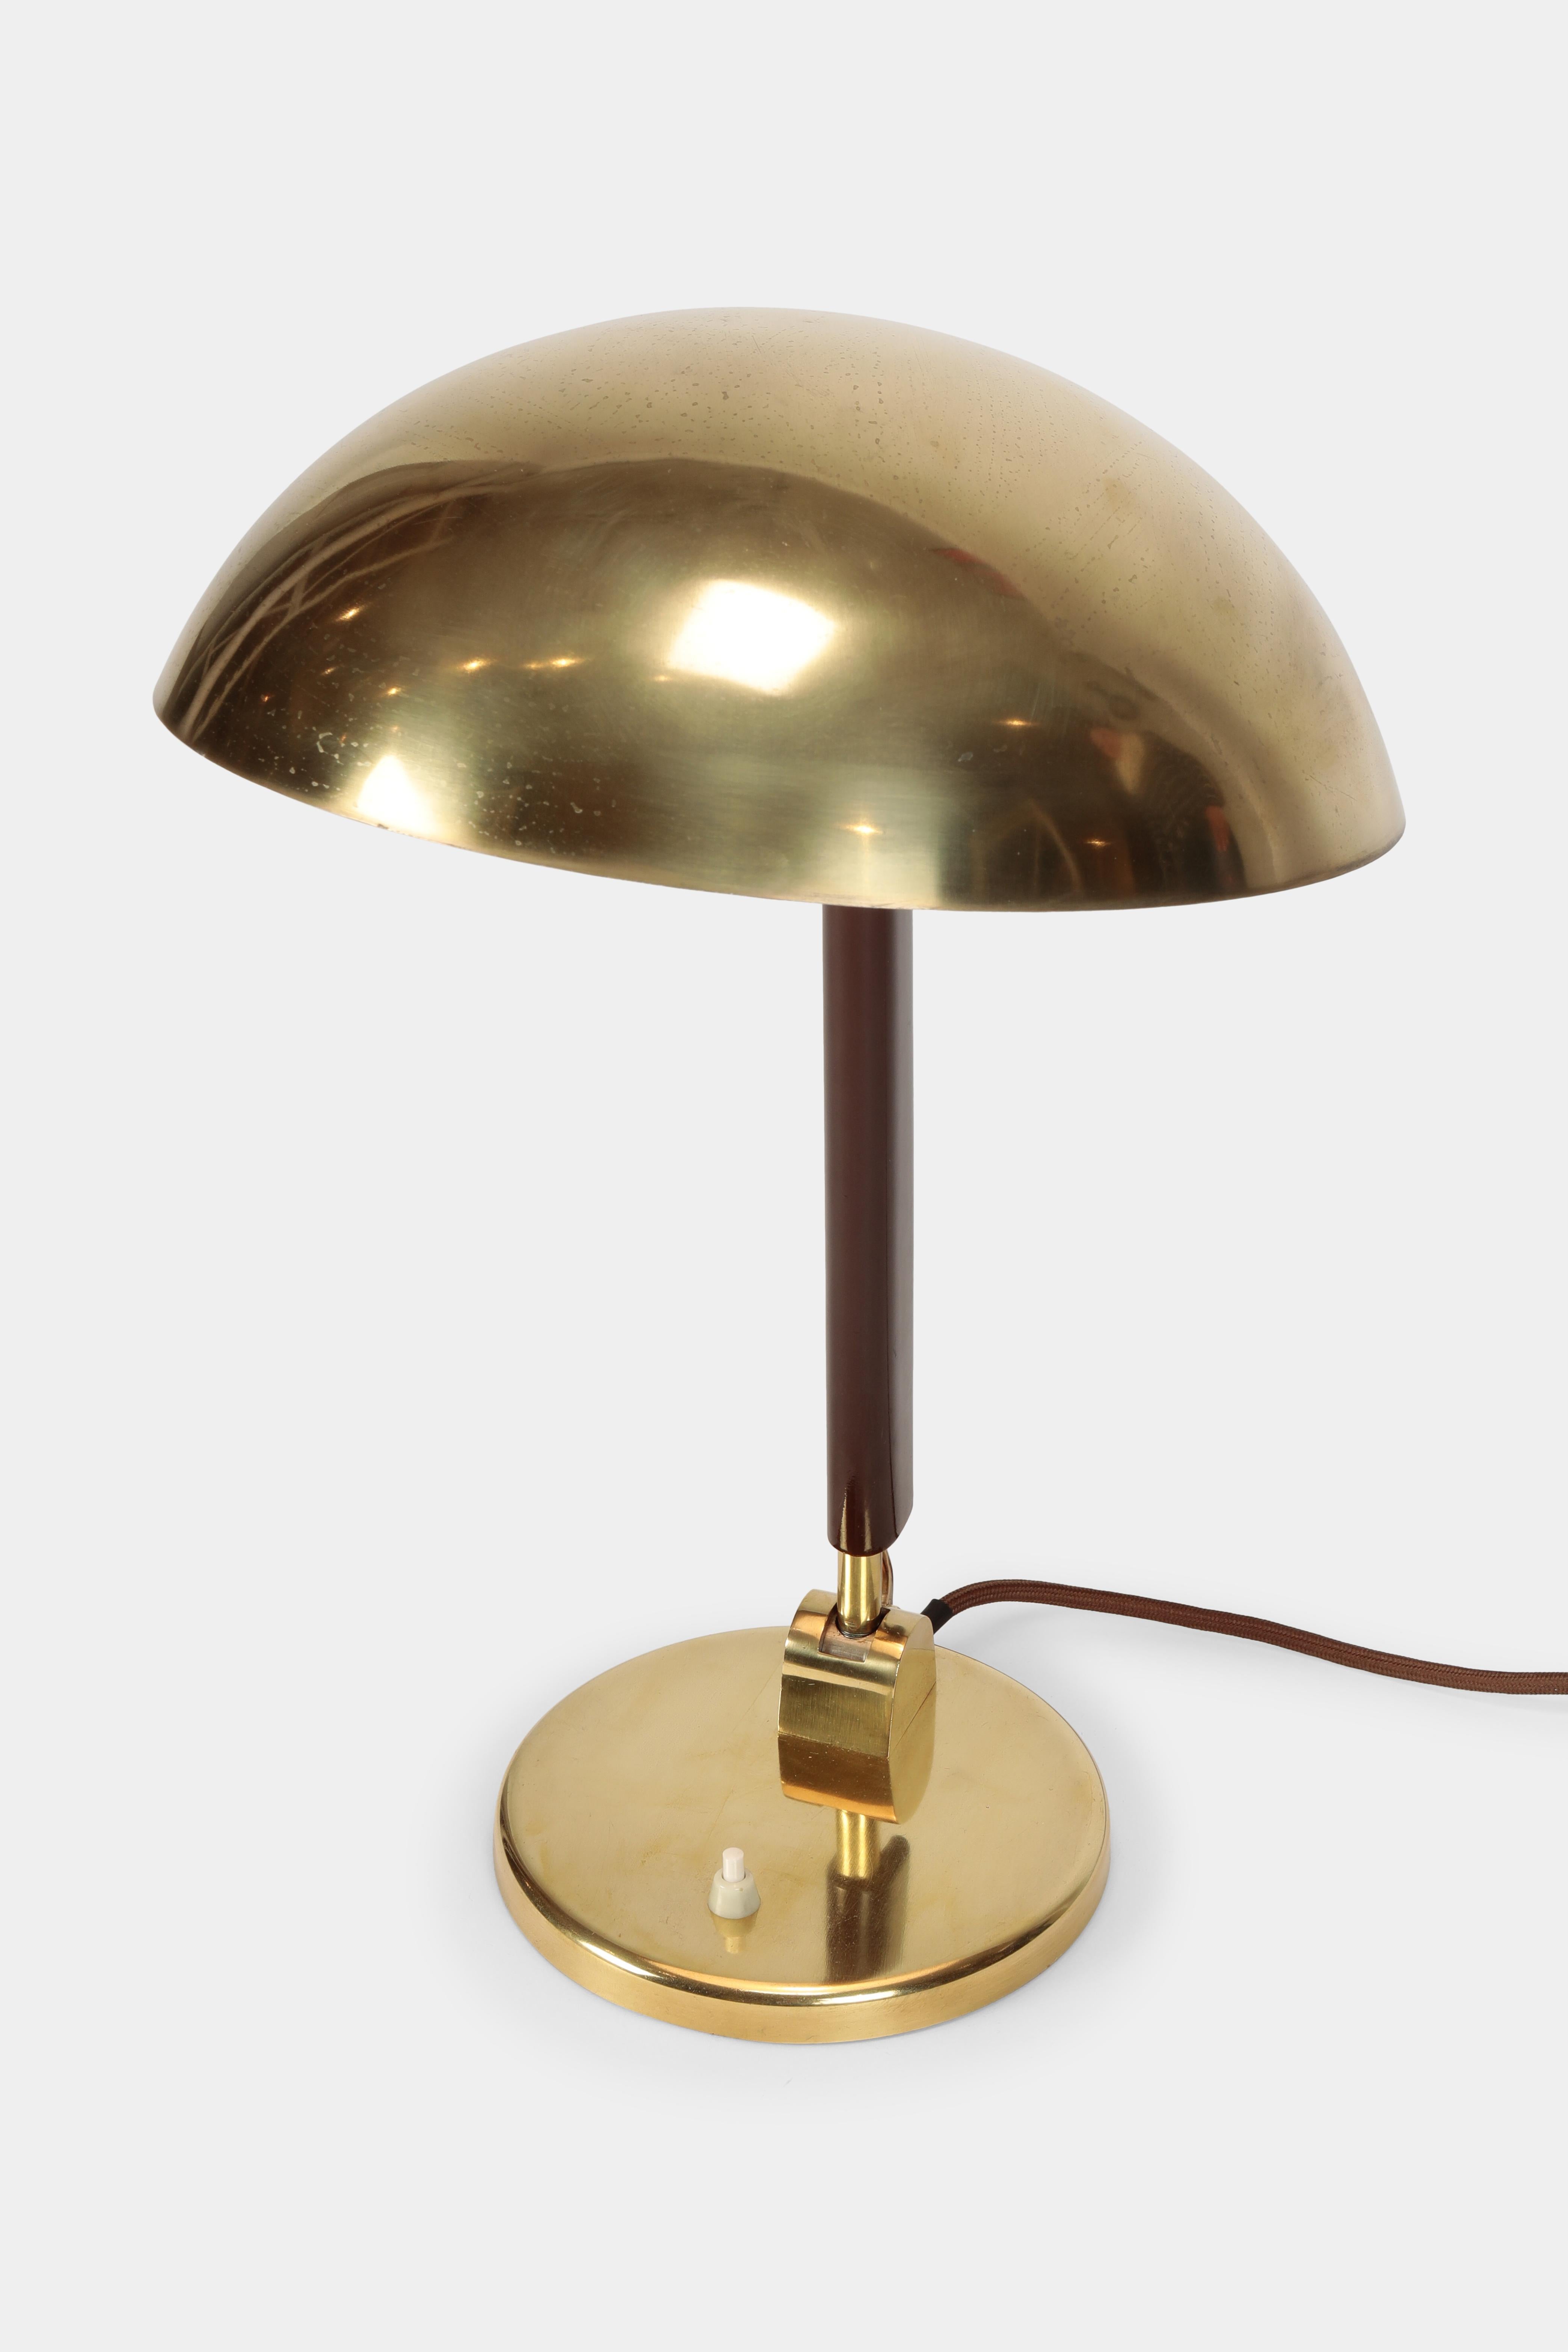 Karl Trabert table lamp manufactured in the 1930s by G. Schanzenbach, Germany. Brass lamp shade inside white lacquered on a solid brass base, brown lacquered wood in between.
 